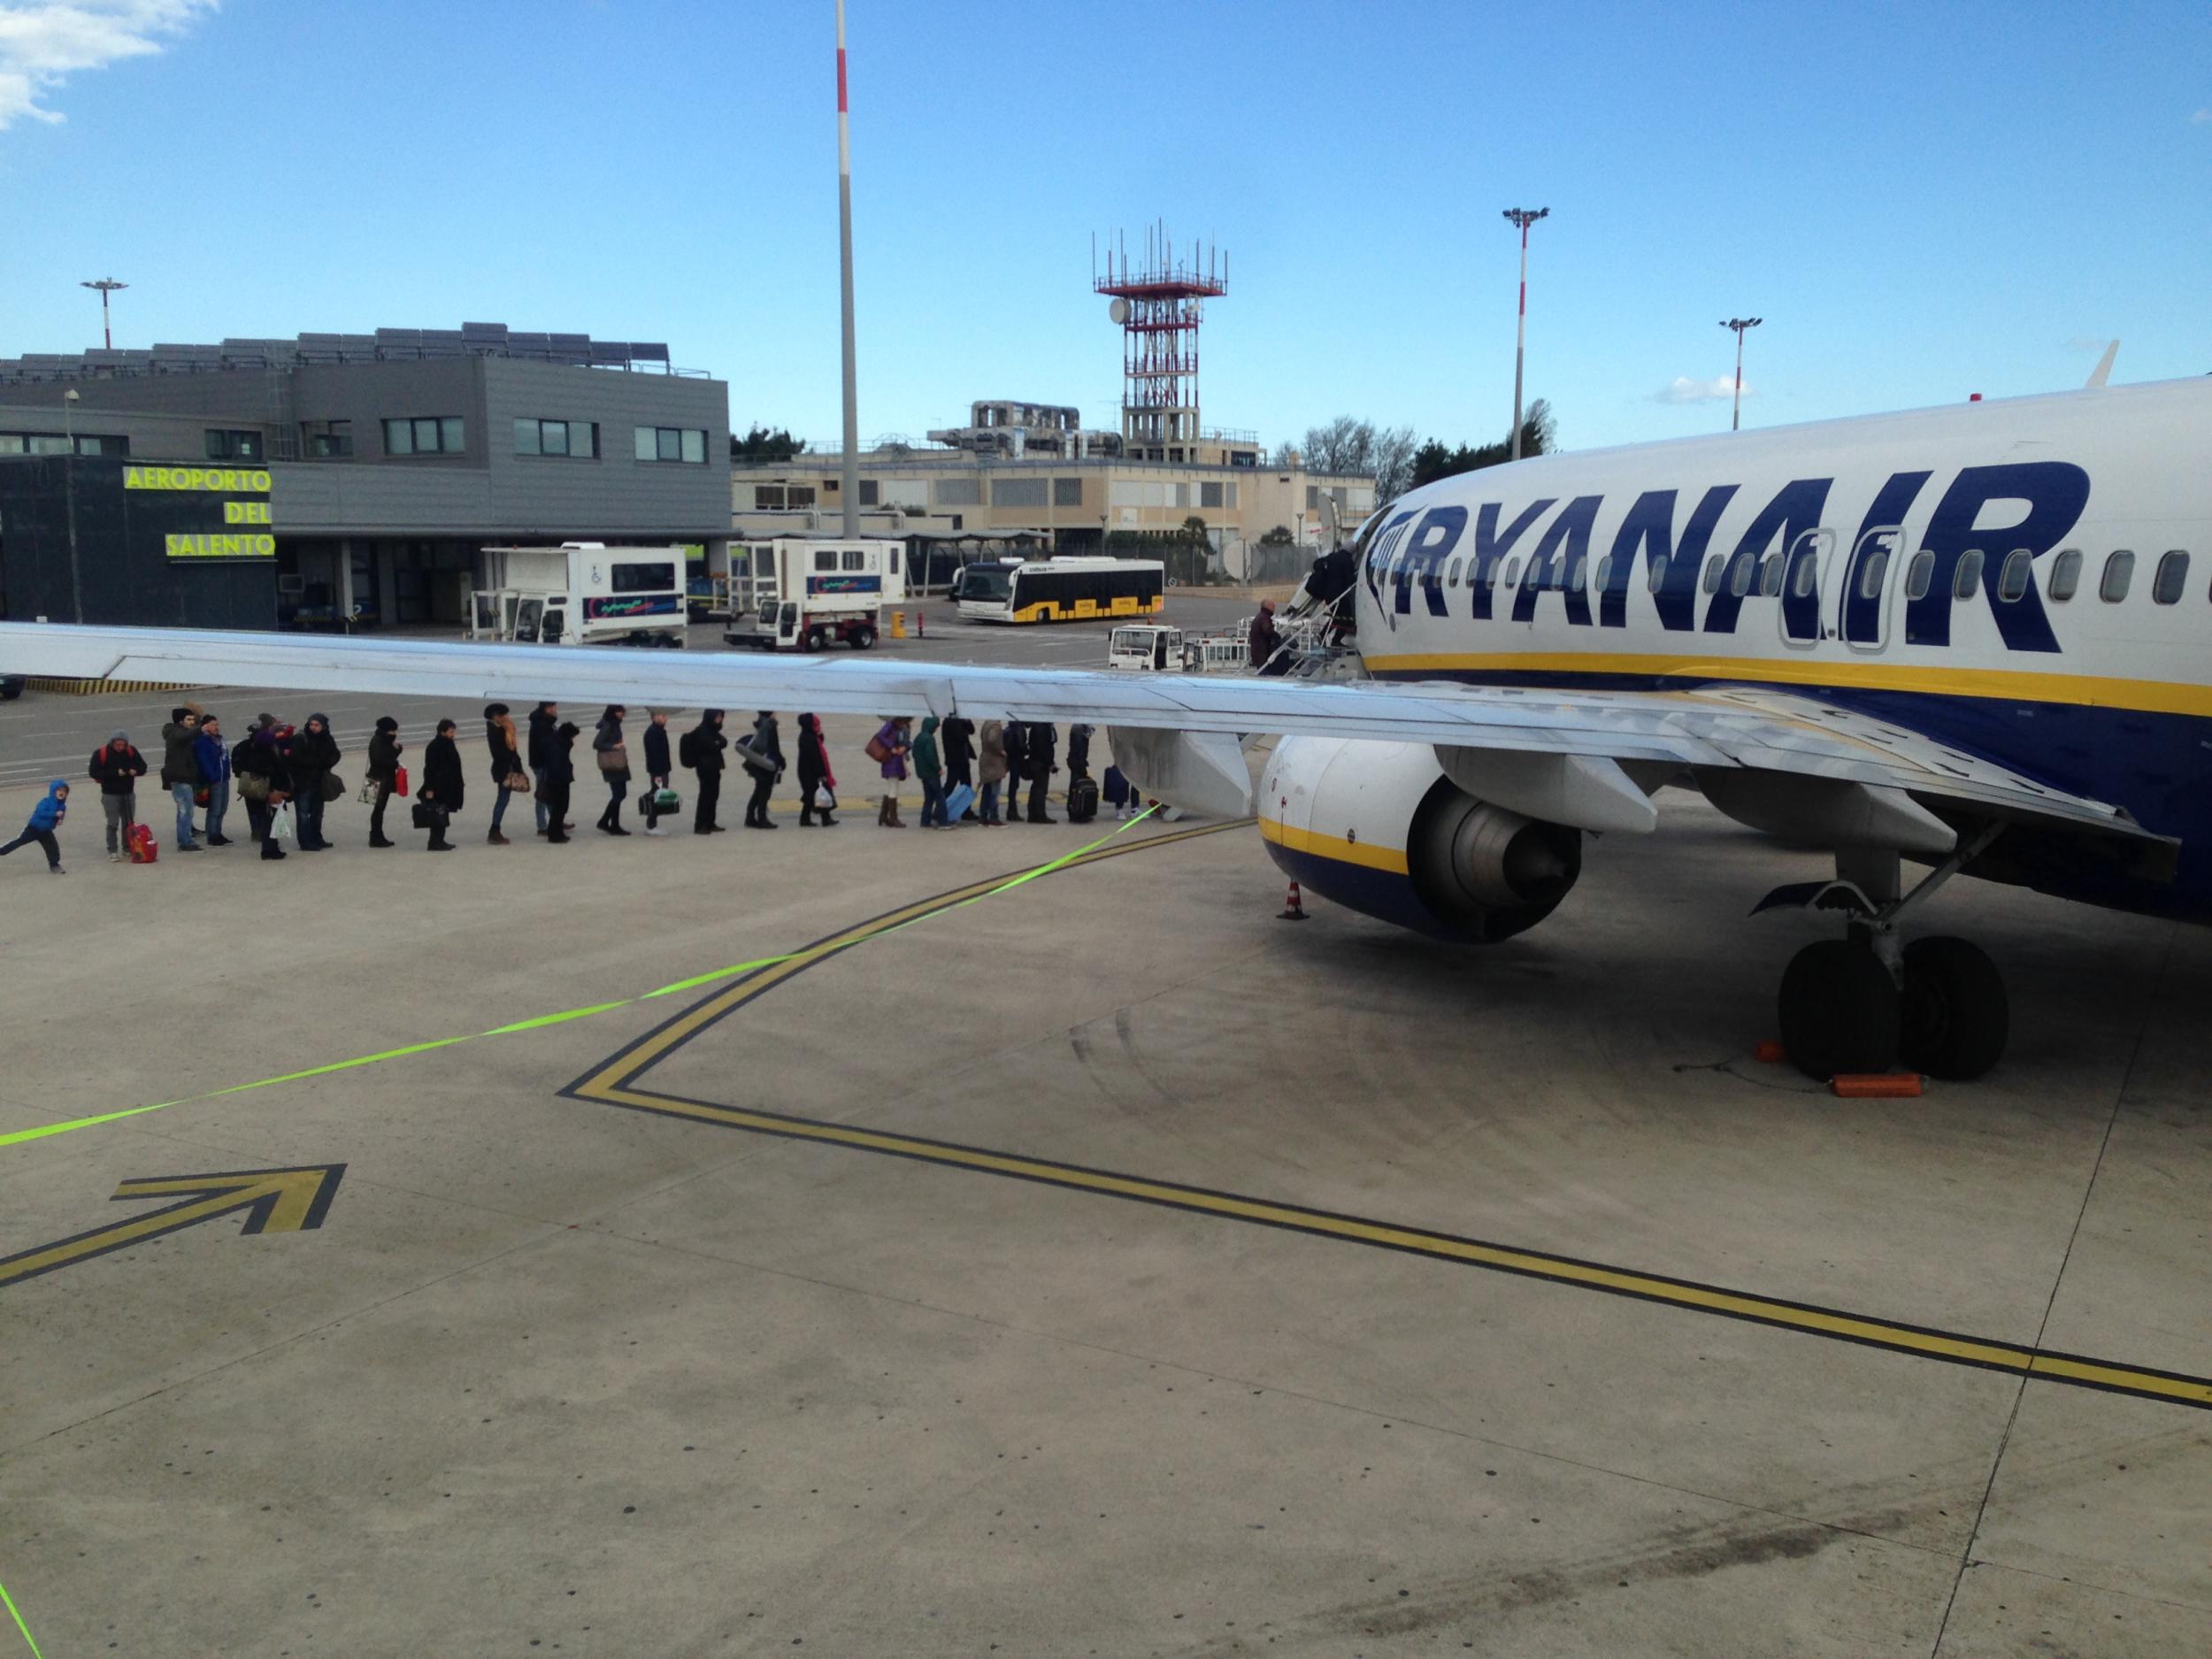 Going places? Passengers boarding a Ryanair flight at Brindisi Airport. The Irish airline is by far the biggest carrier in Italy